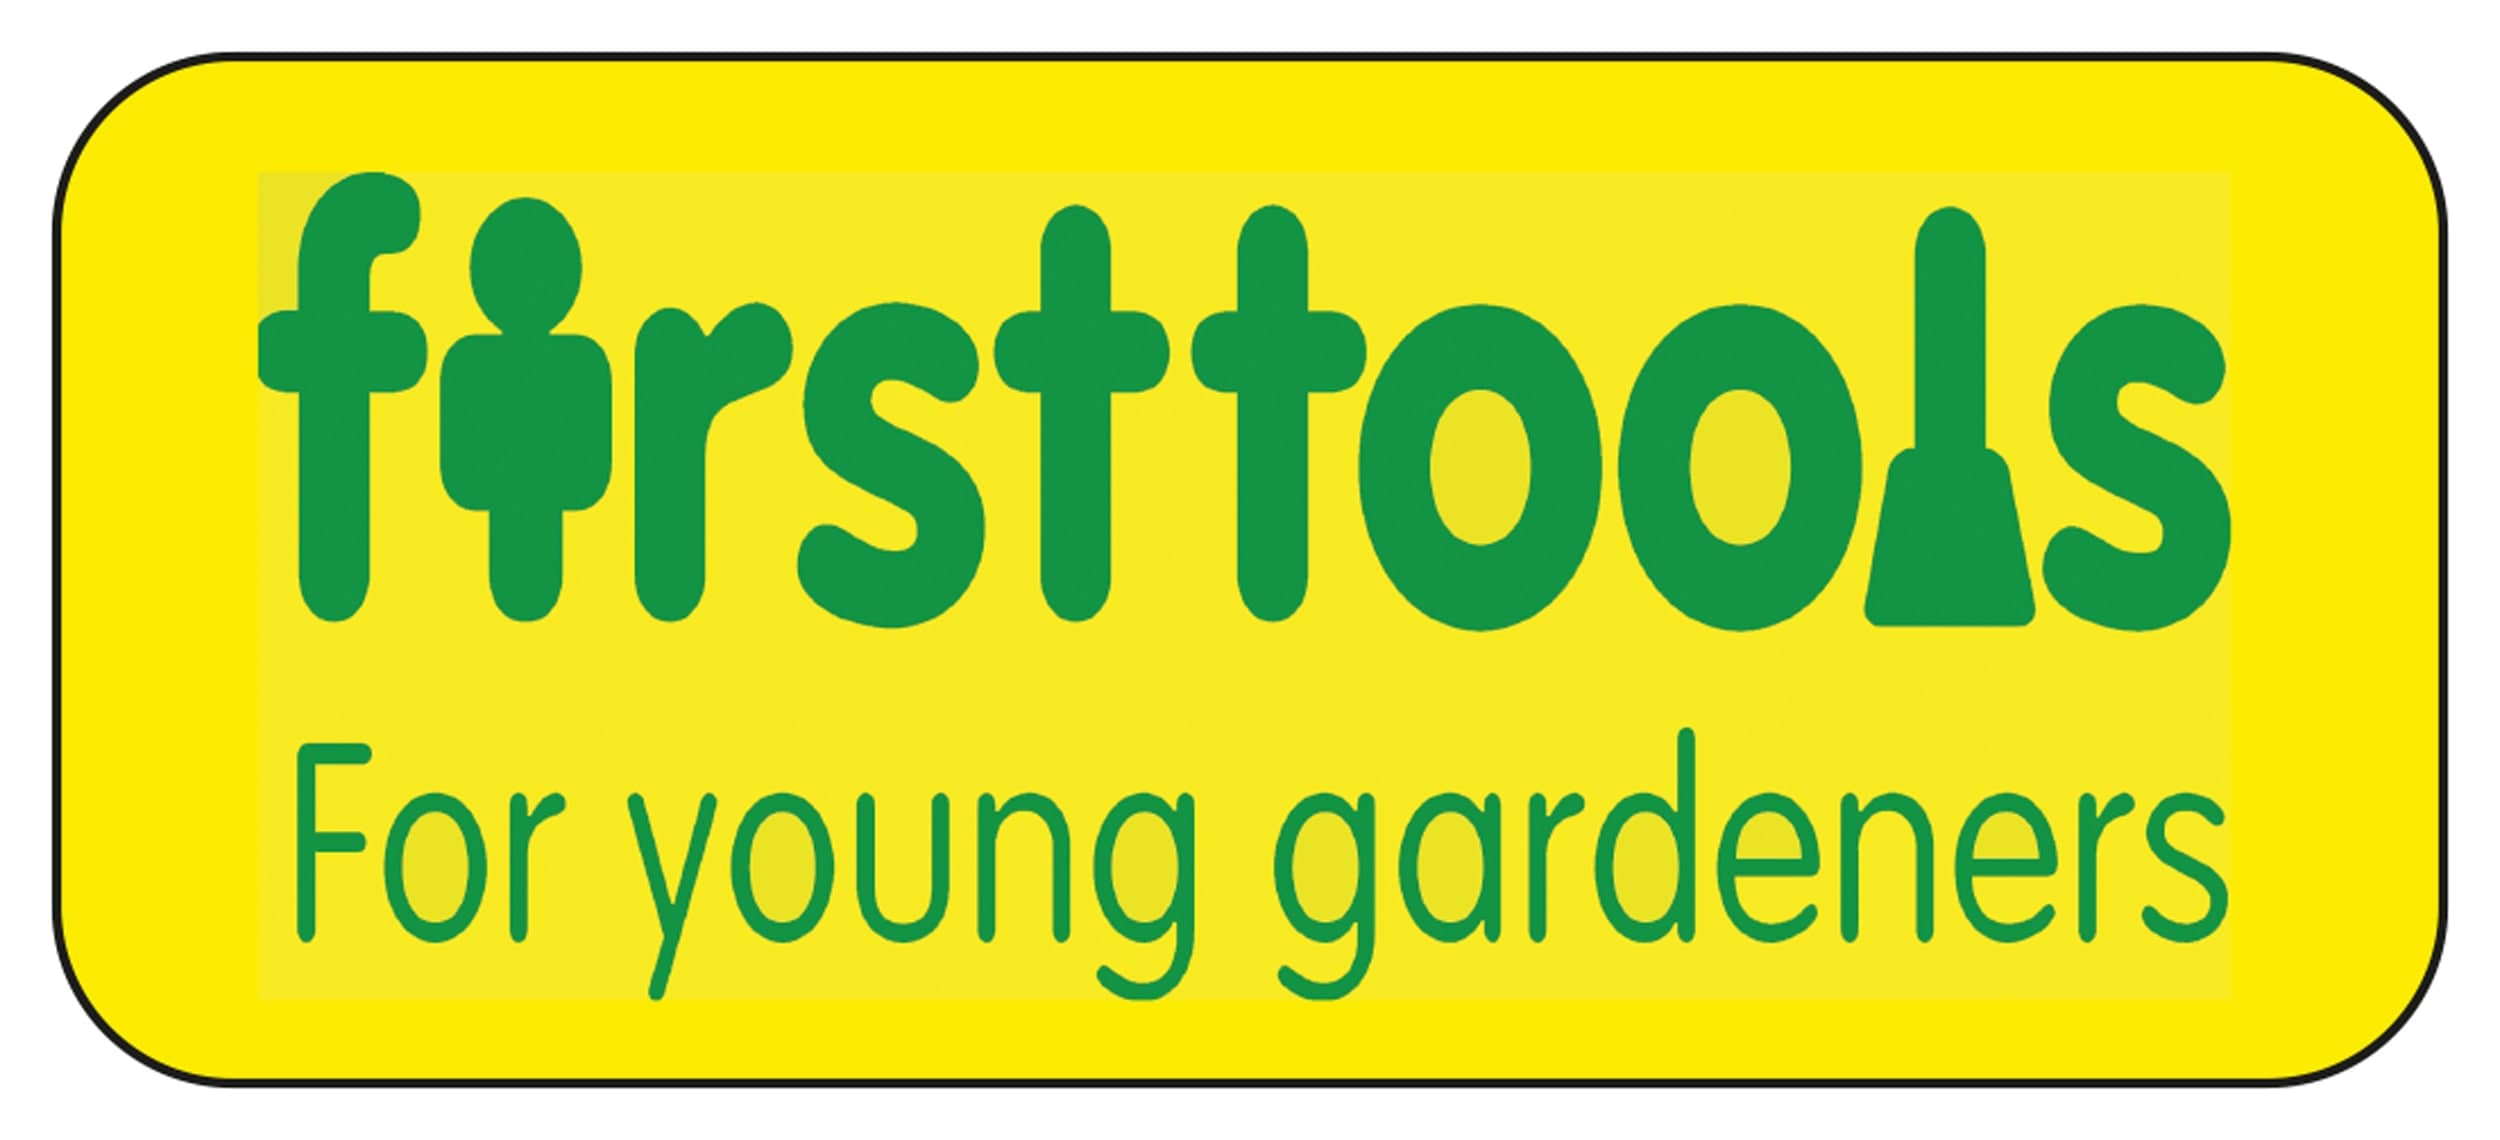 first tools - for young gardeners